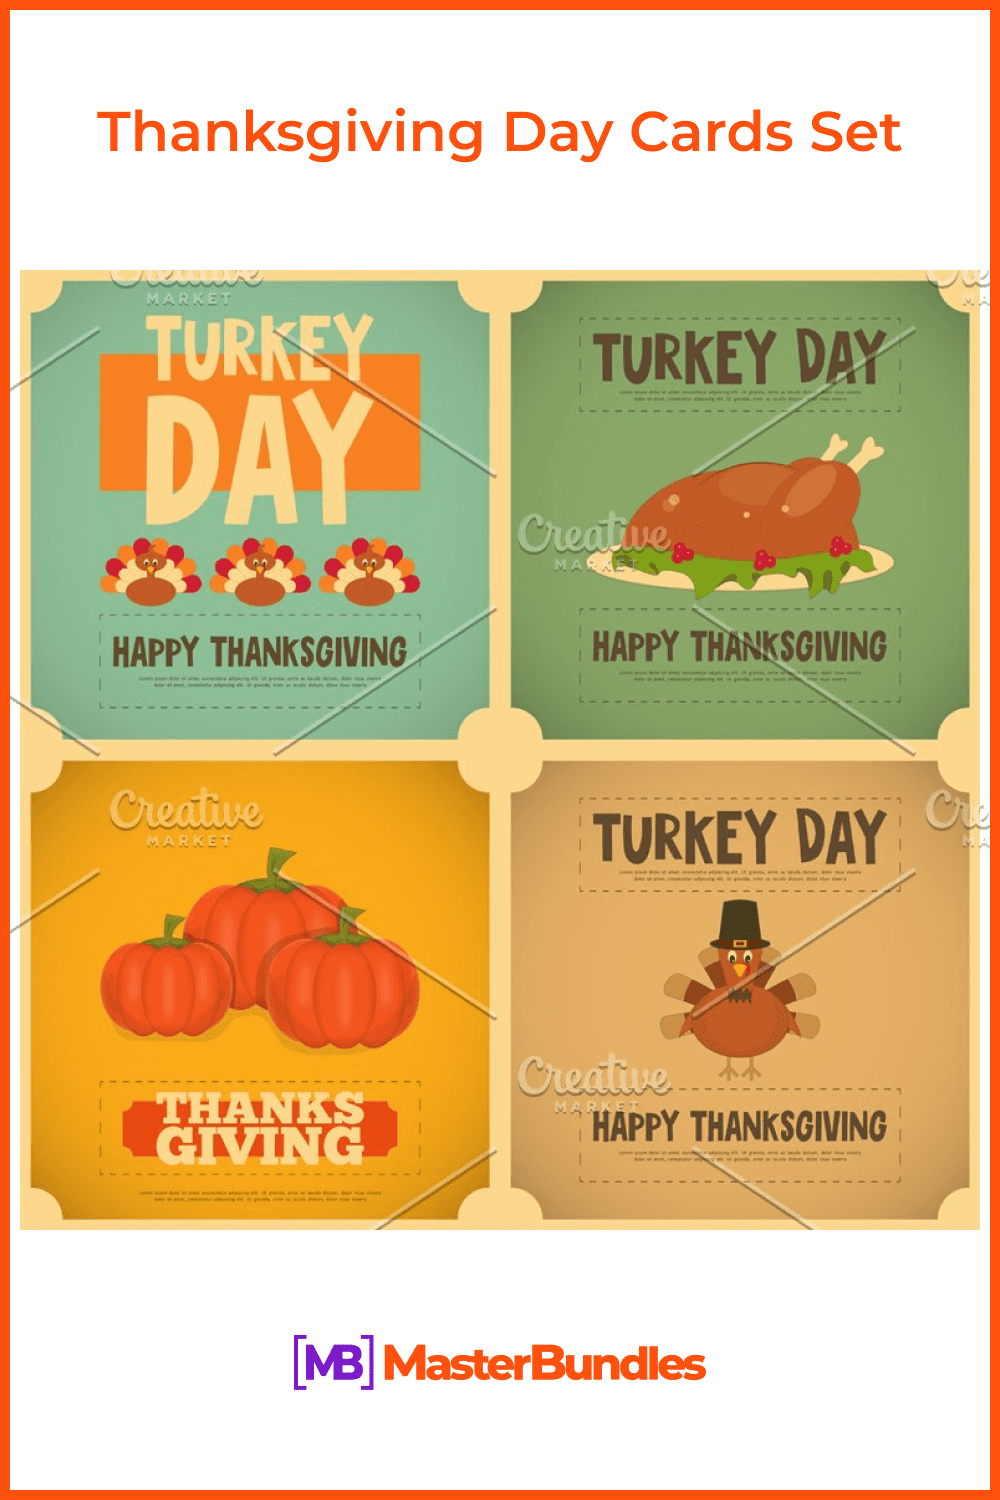 Thanksgiving day cards set.